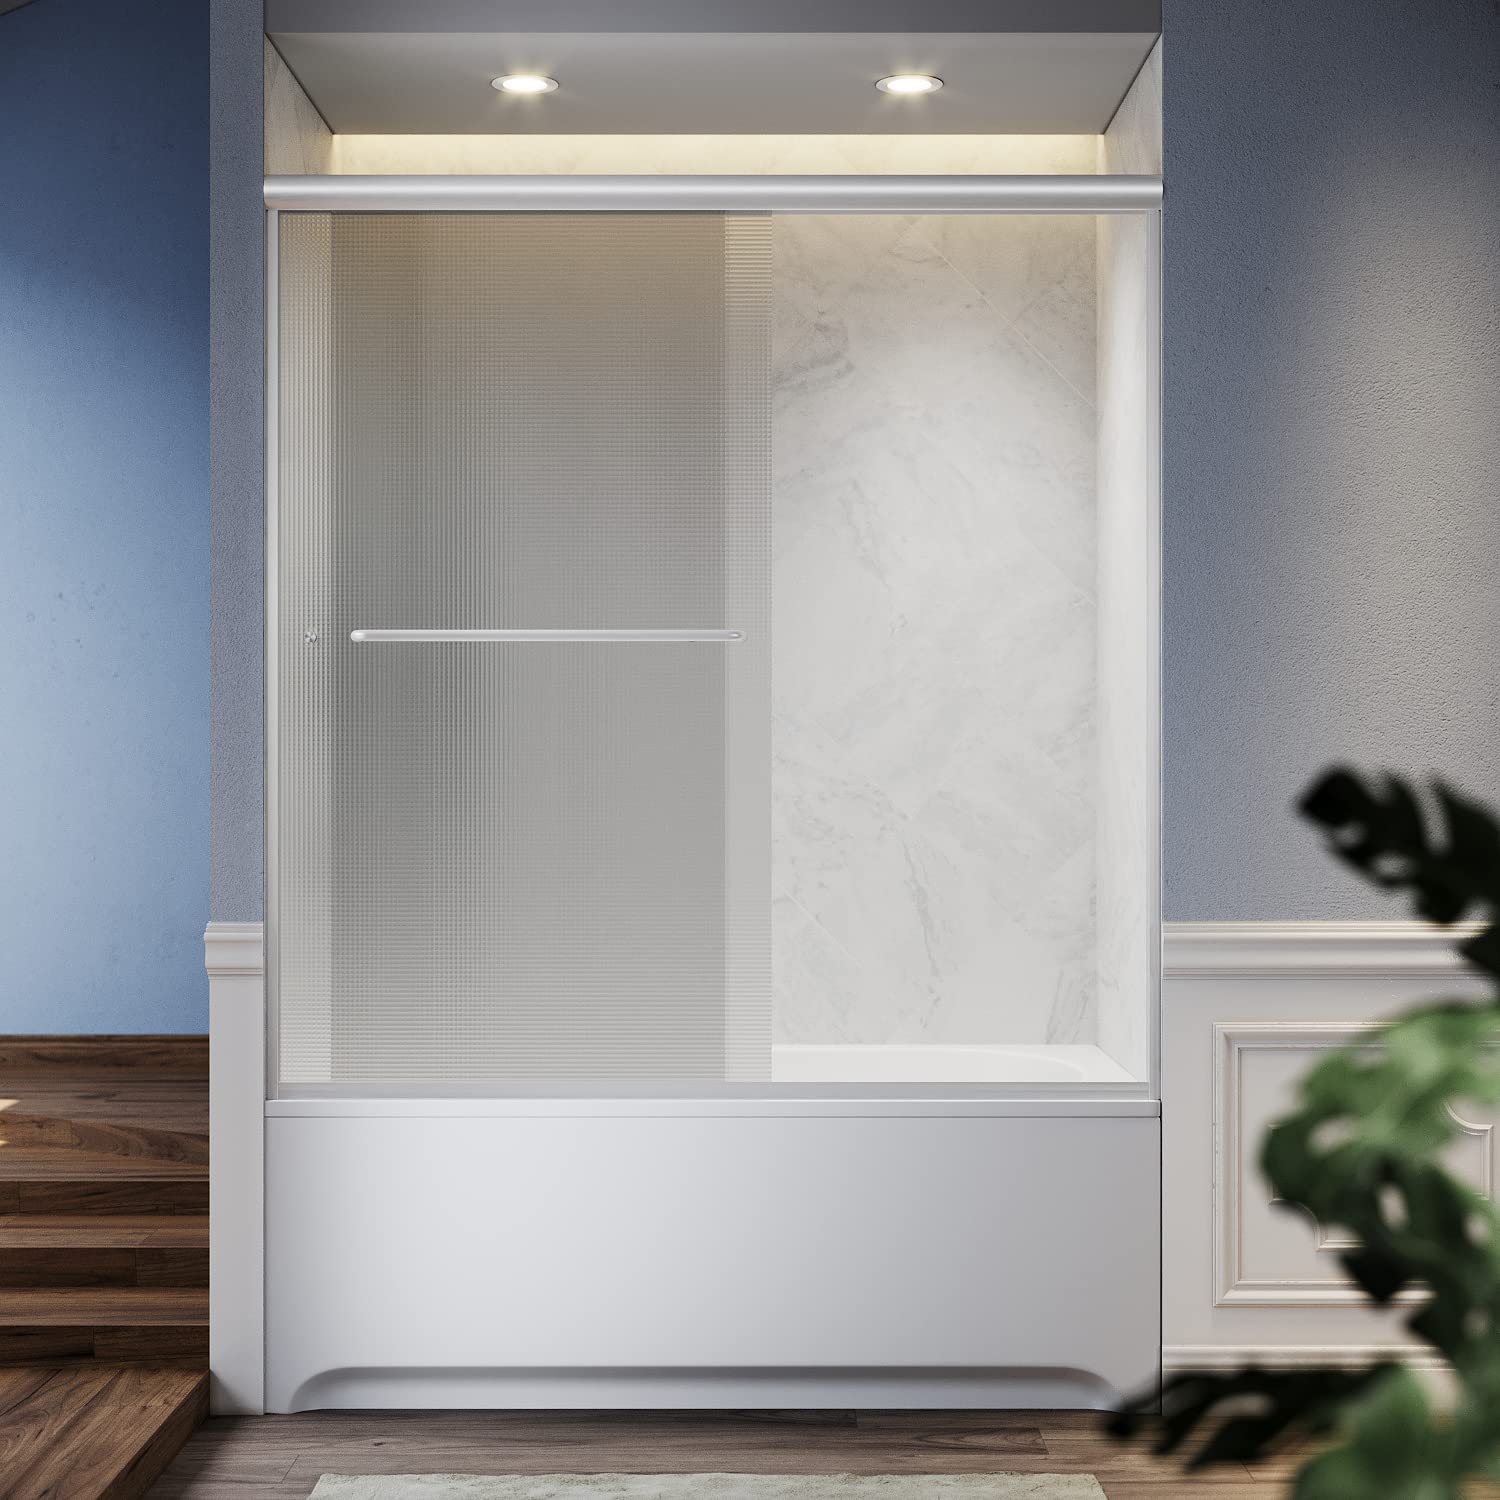 SUNNY SHOWER 60 in. W x 57.4 in. H Frosted Glass Brushed Nickel Finish Sliding Bathtub Door - SUNNY SHOWER